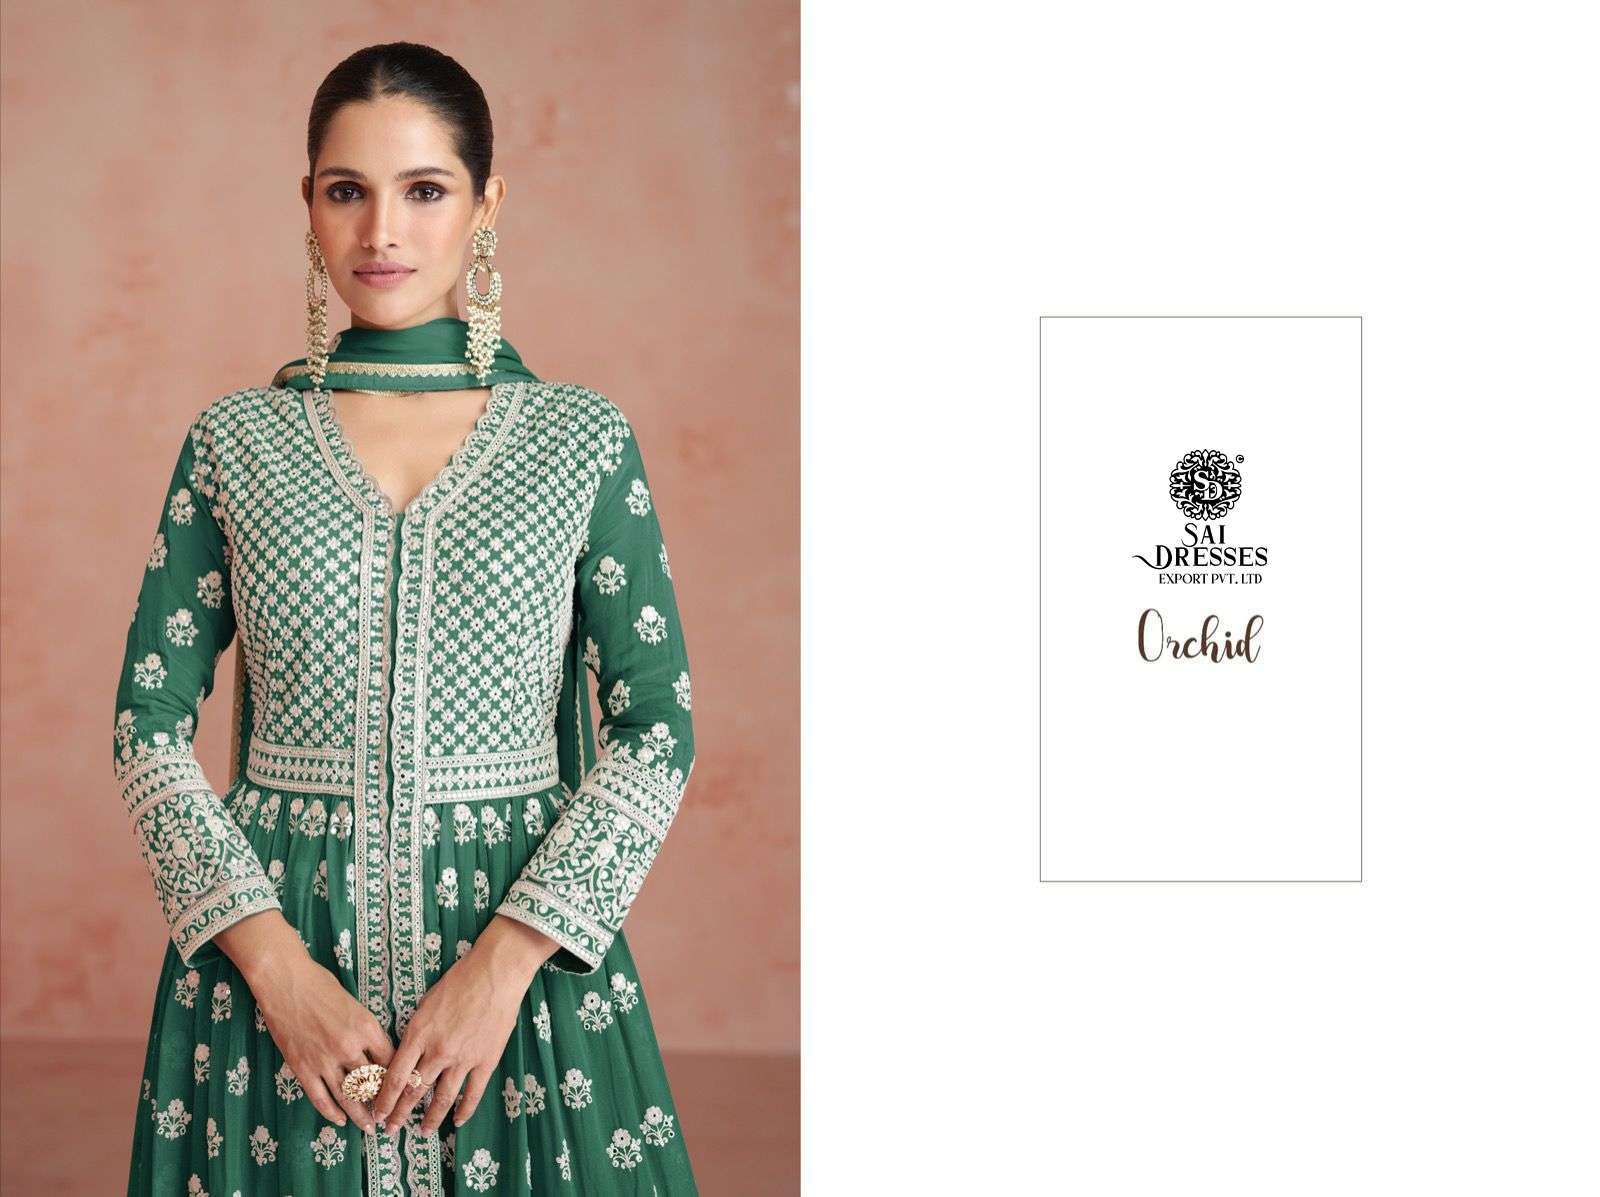 SAI DRESSES PRESENT ORCHID READYMADE FESTIVE WEAR DESIGNER SUITS IN WHOLESALE RATE IN SURAT